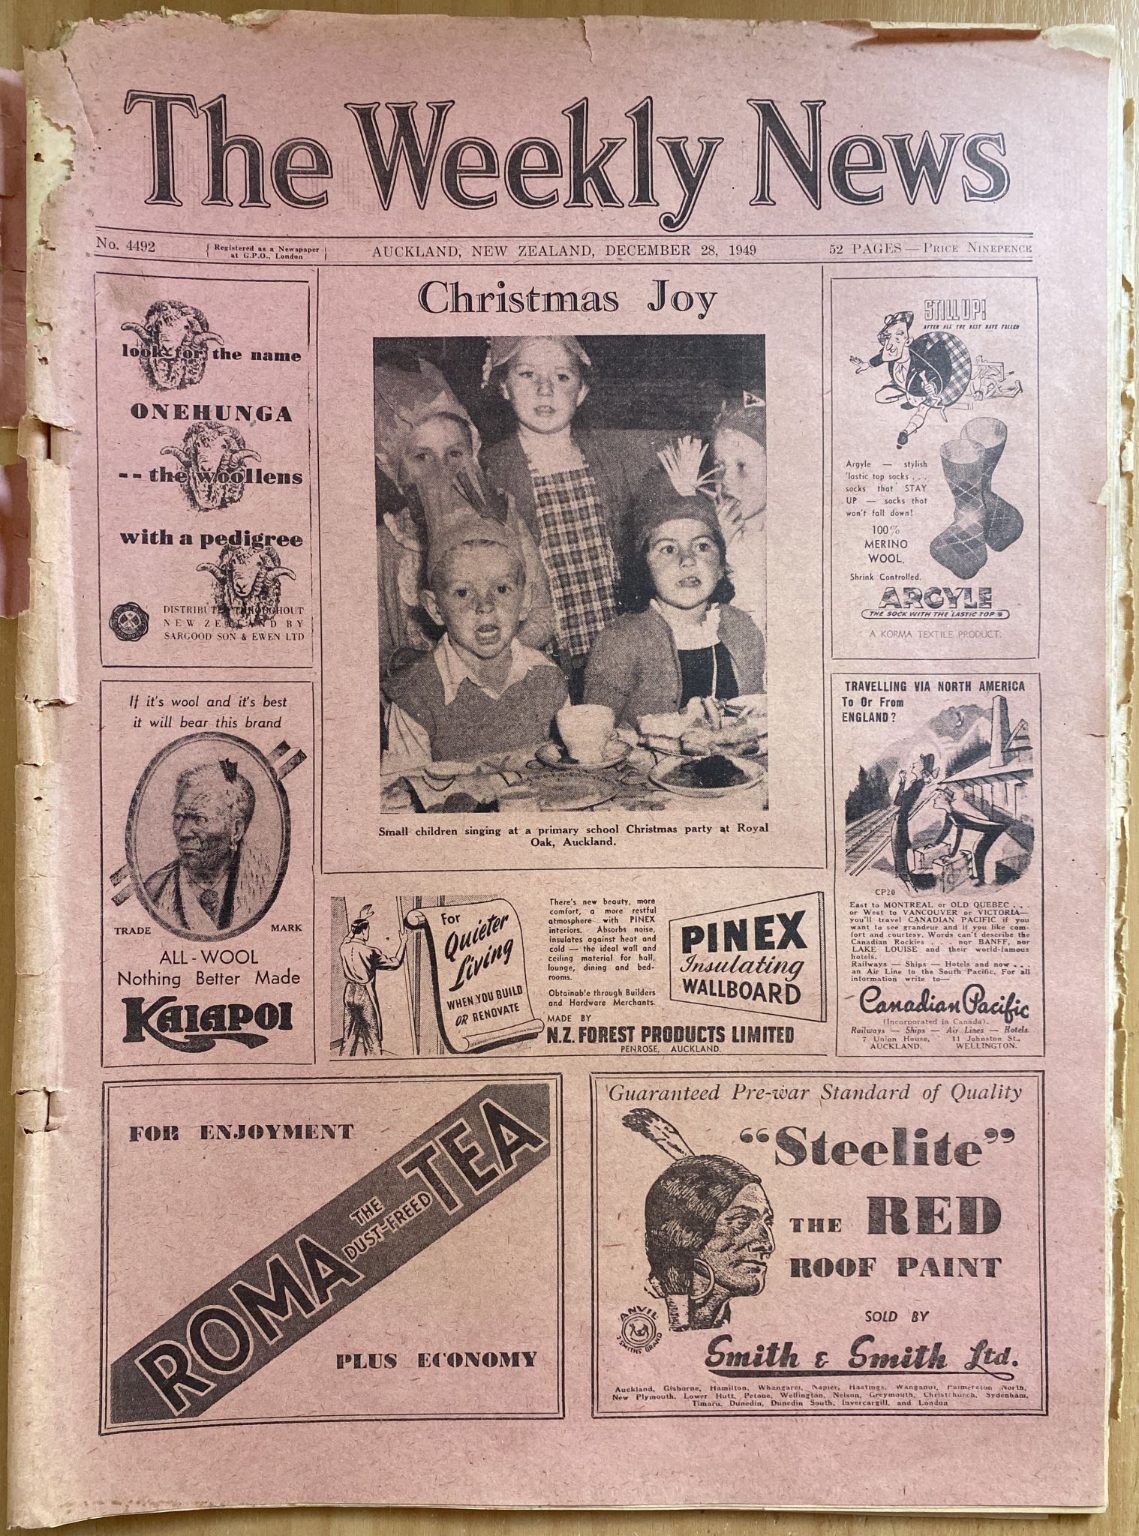 OLD NEWSPAPER: The Weekly News, No. 4492, 28 December 1949